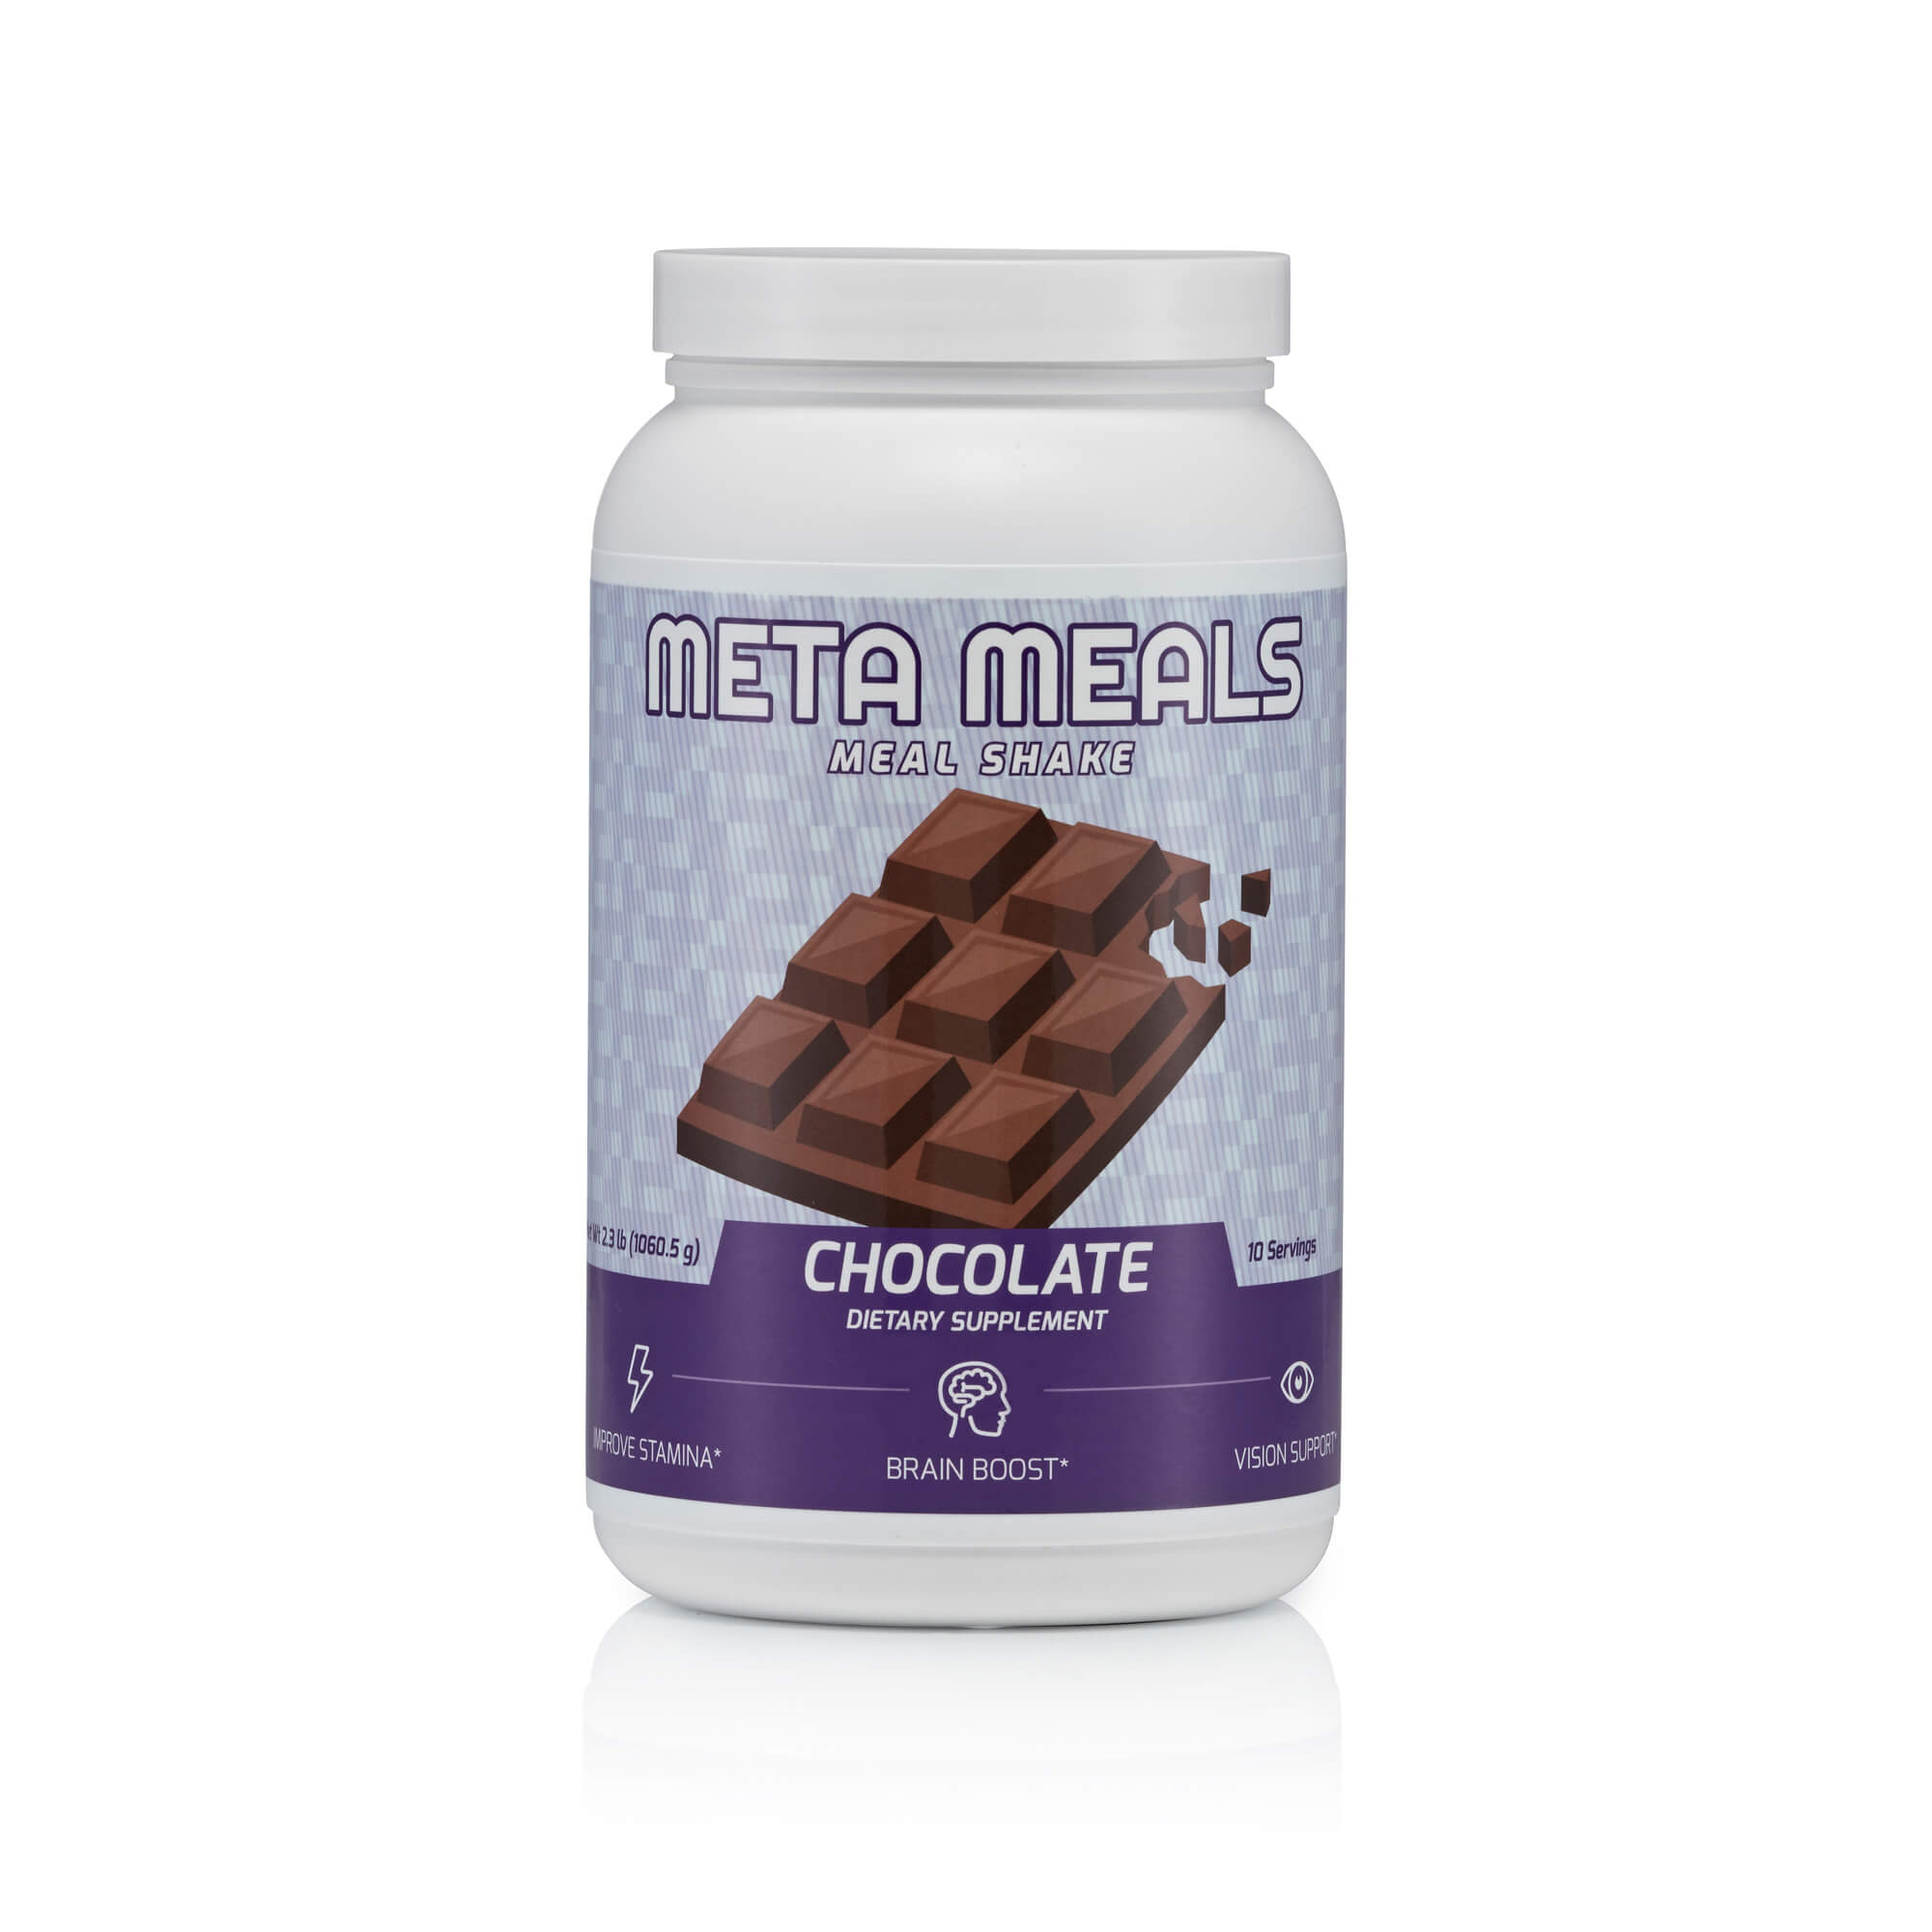 Chocolate meal replacement shake powder tub for gamers